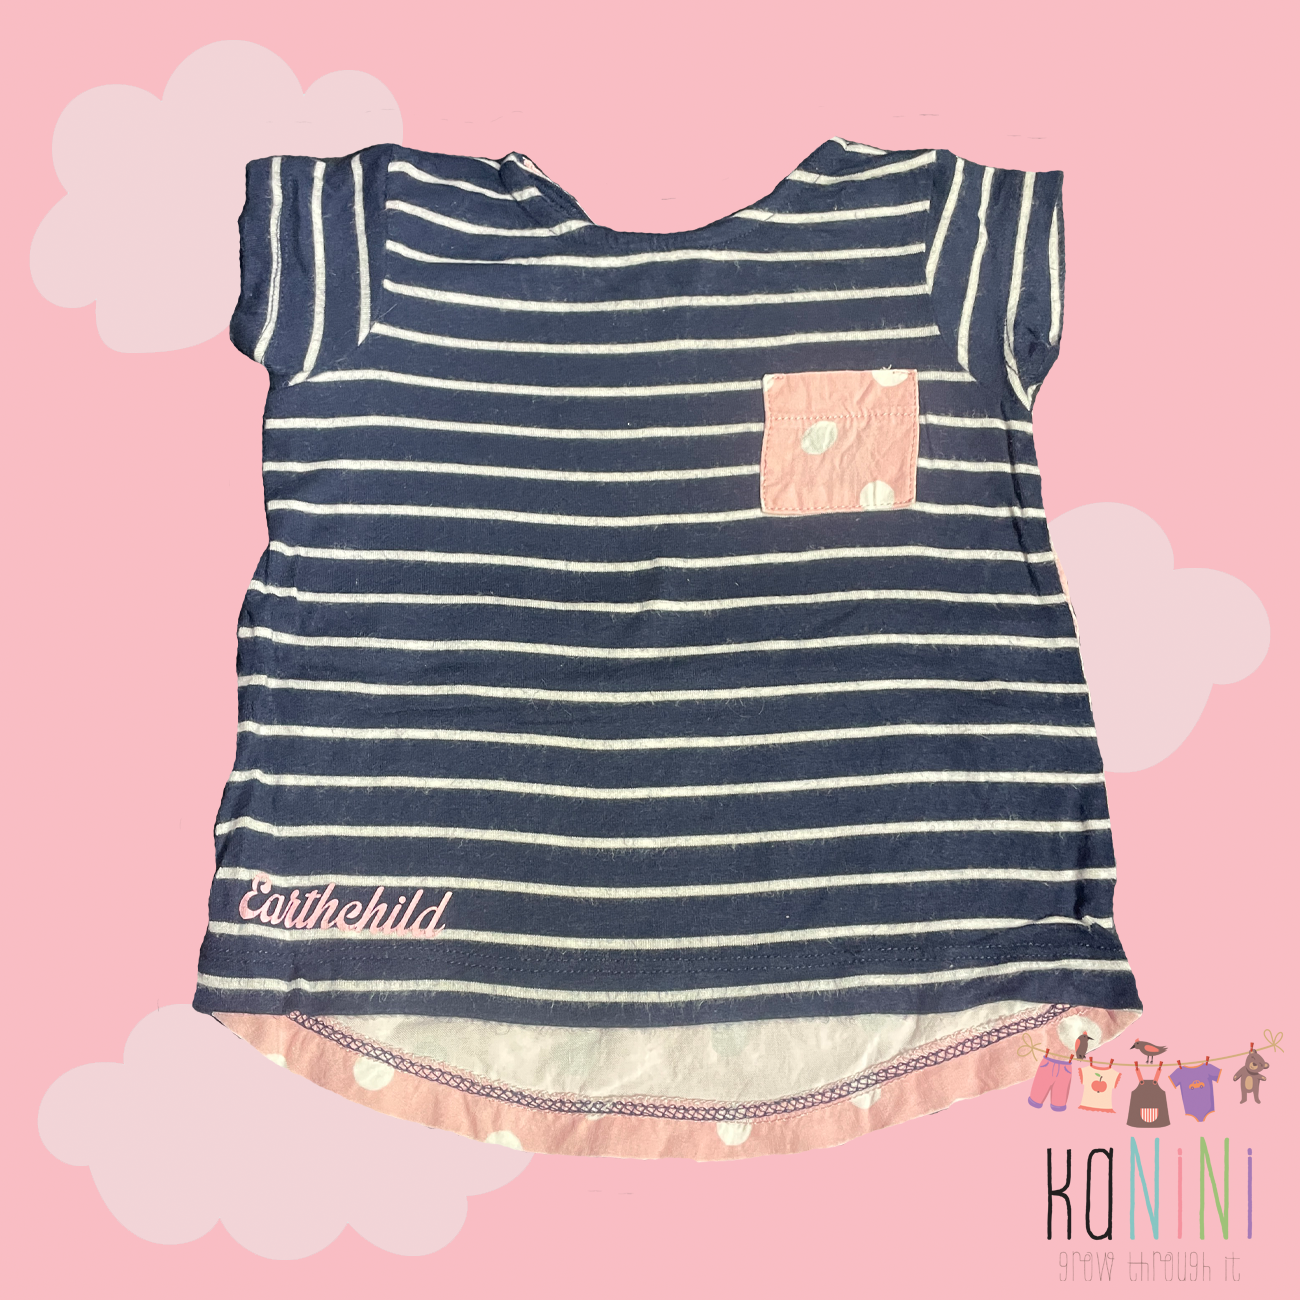 Featured image for “Earthchild 6 - 12 Months Girls Polkadot T-Shirt”